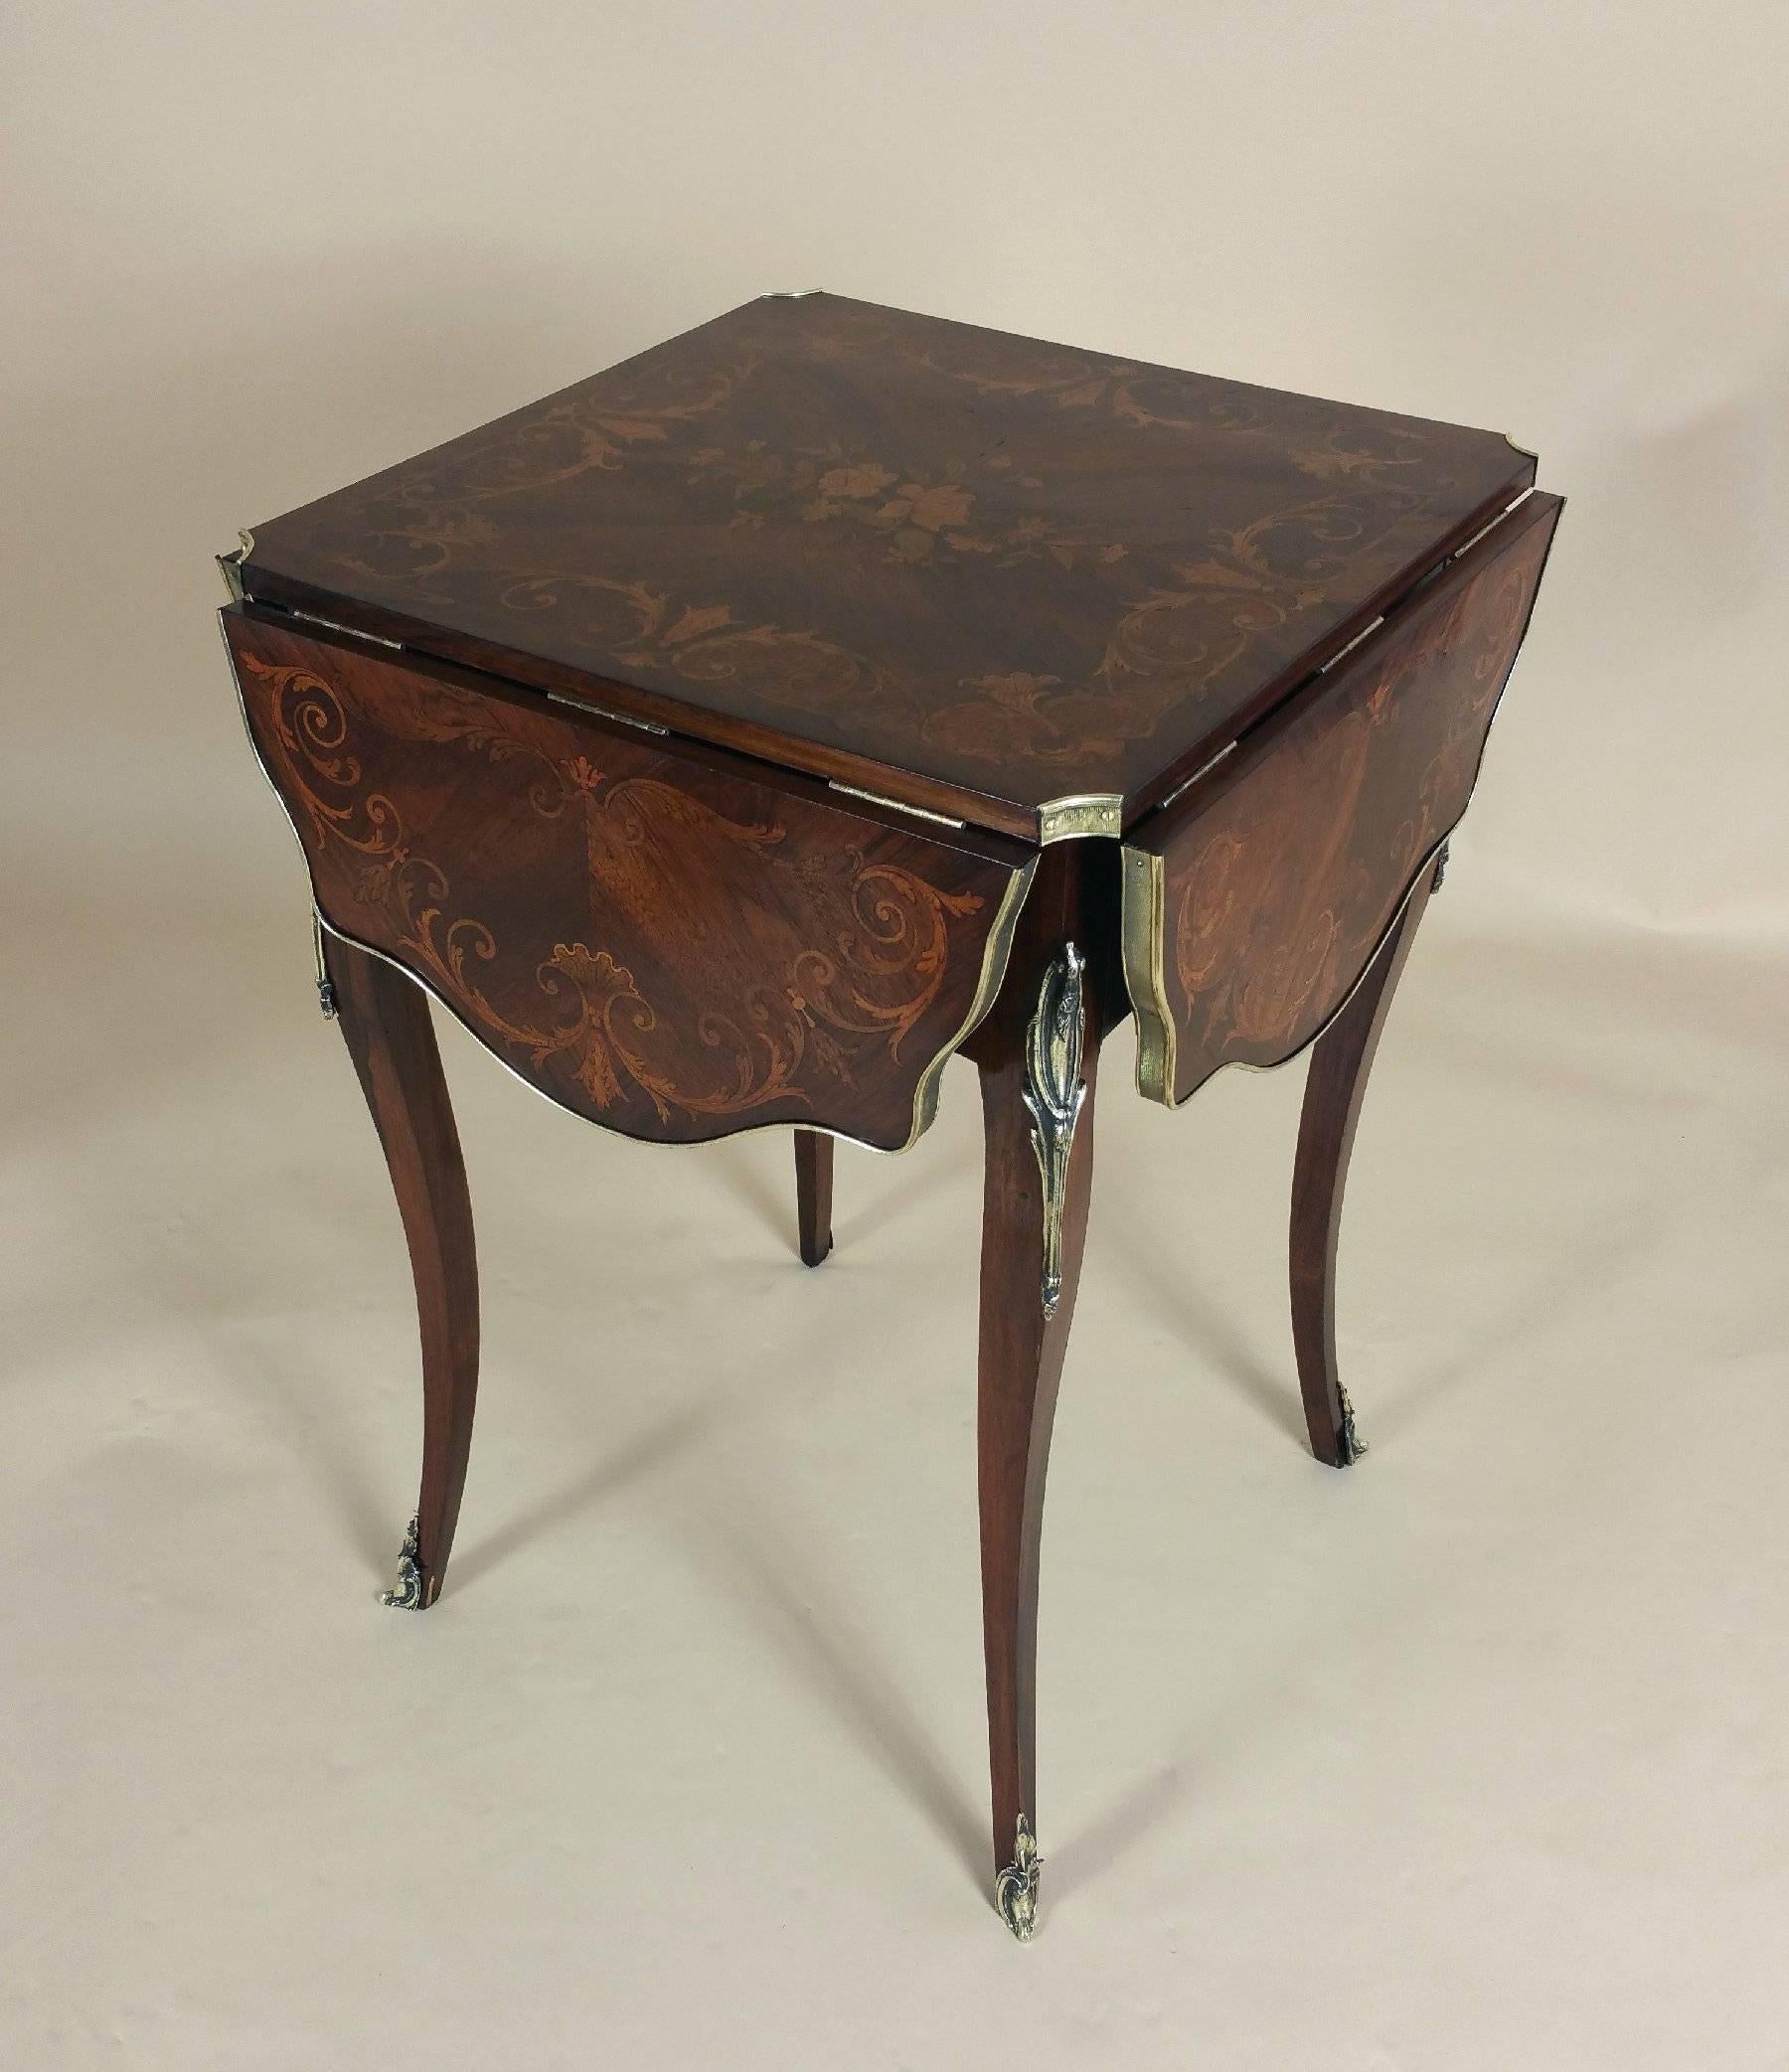 This magnificent late 19th century French marquetry rosewood centre table features an intricate inlaid design of scrolls and floral patterns in olivewood and satinwood. The table has four folding shaped sides, with a brass rim border and ornate